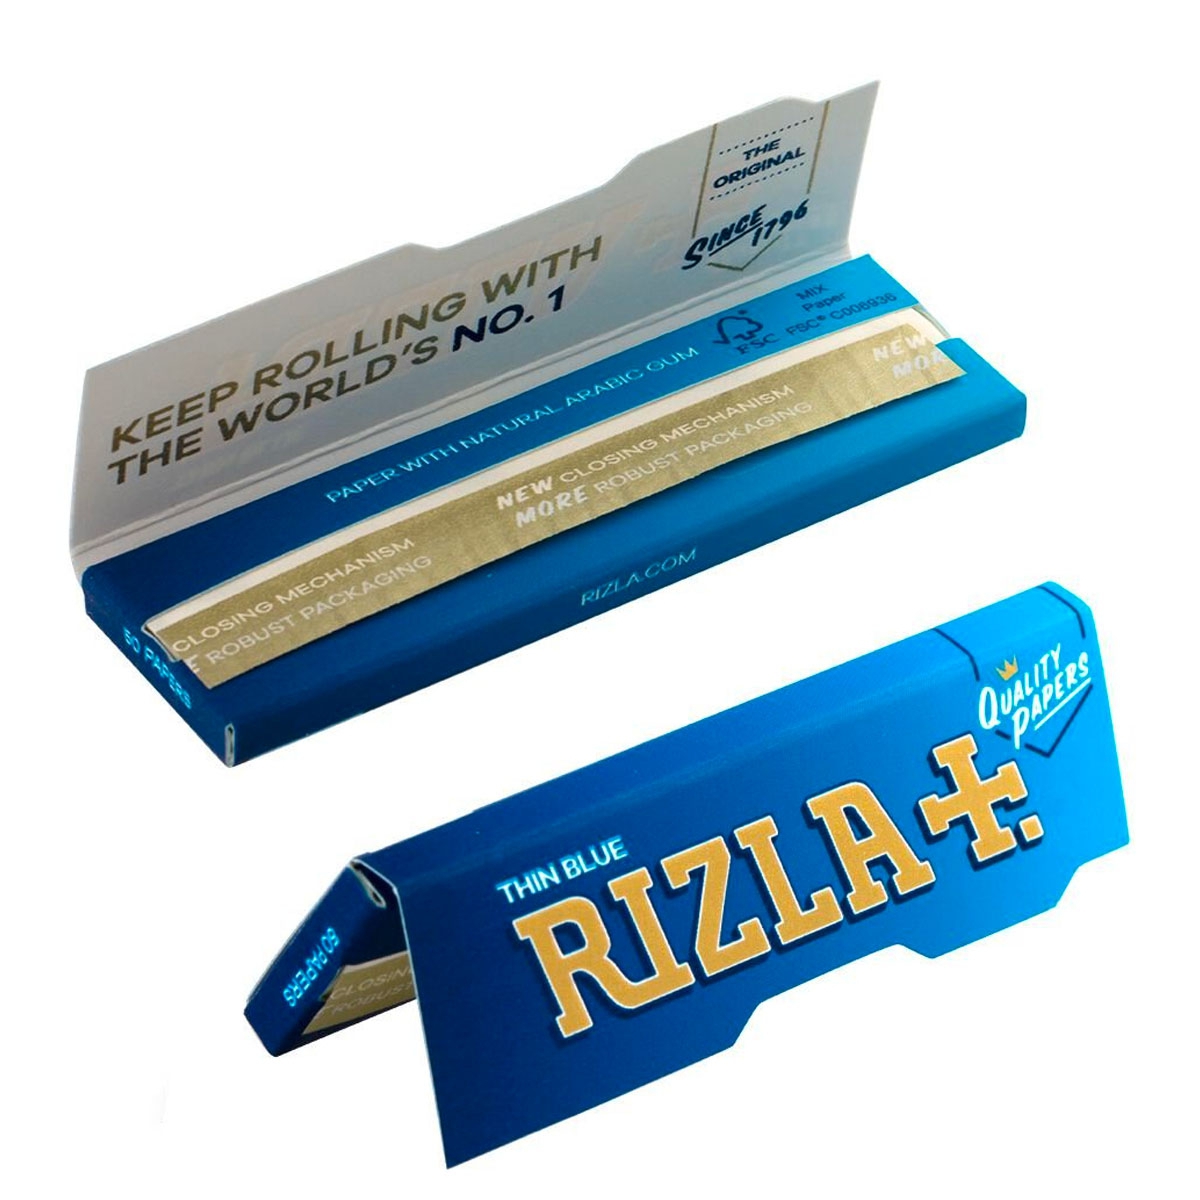 4 FUL BOX Rizla Thin Blue Rolling Papers Standard Size Regular 100 Booklets 2 